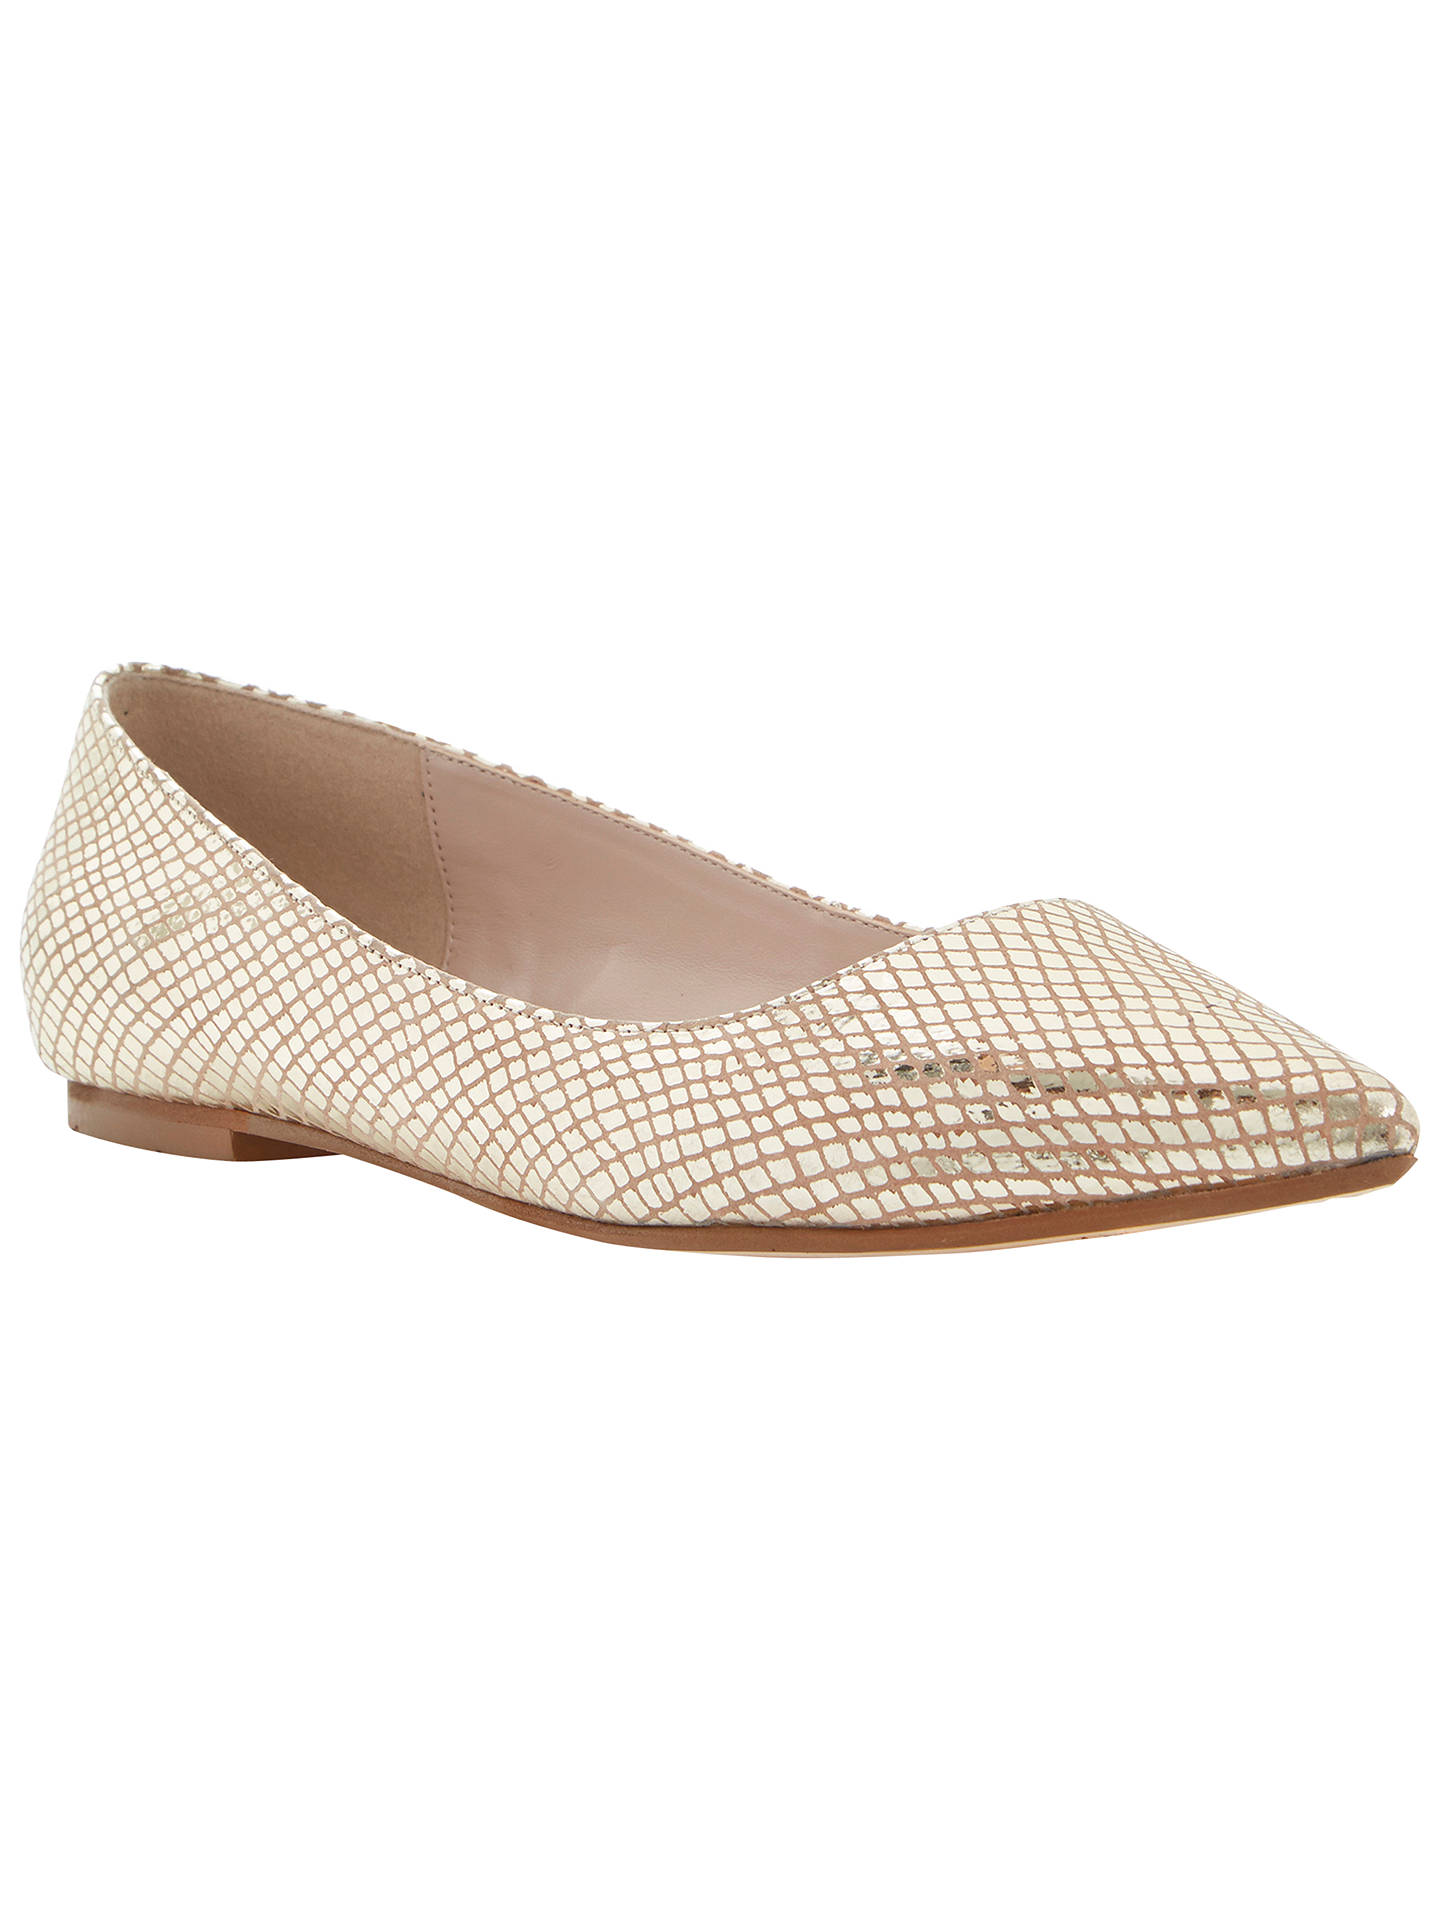 Dune Amarie Pointy Reptile Pumps at John Lewis & Partners